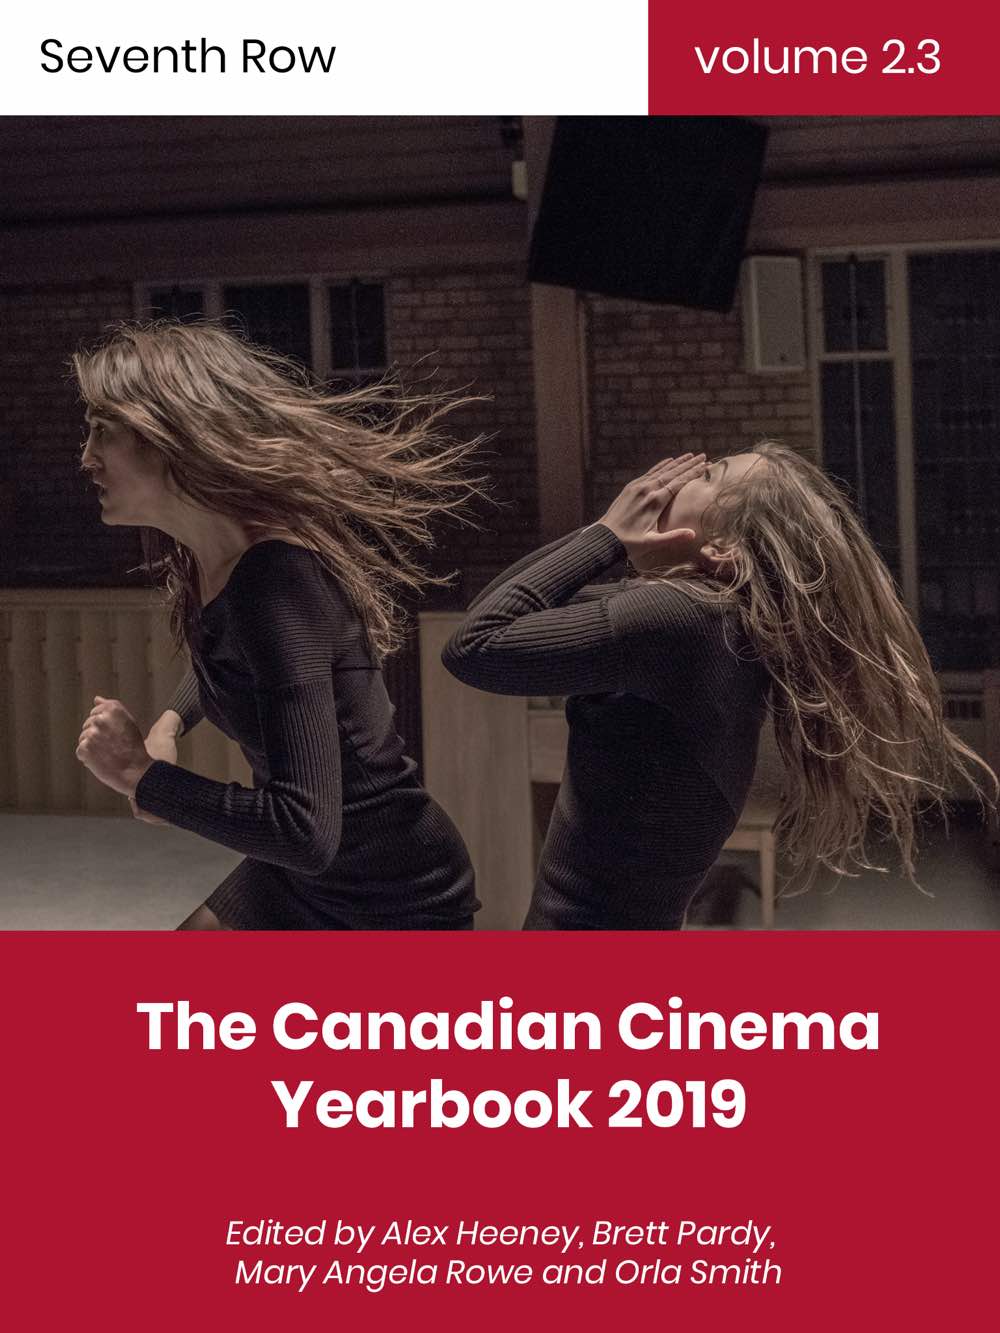 The cover of the Canadian Cinema Yearbook which contains interviews with other great Indigenous filmmakers besides Jeff Barnaby whom we discuss on the podcast.